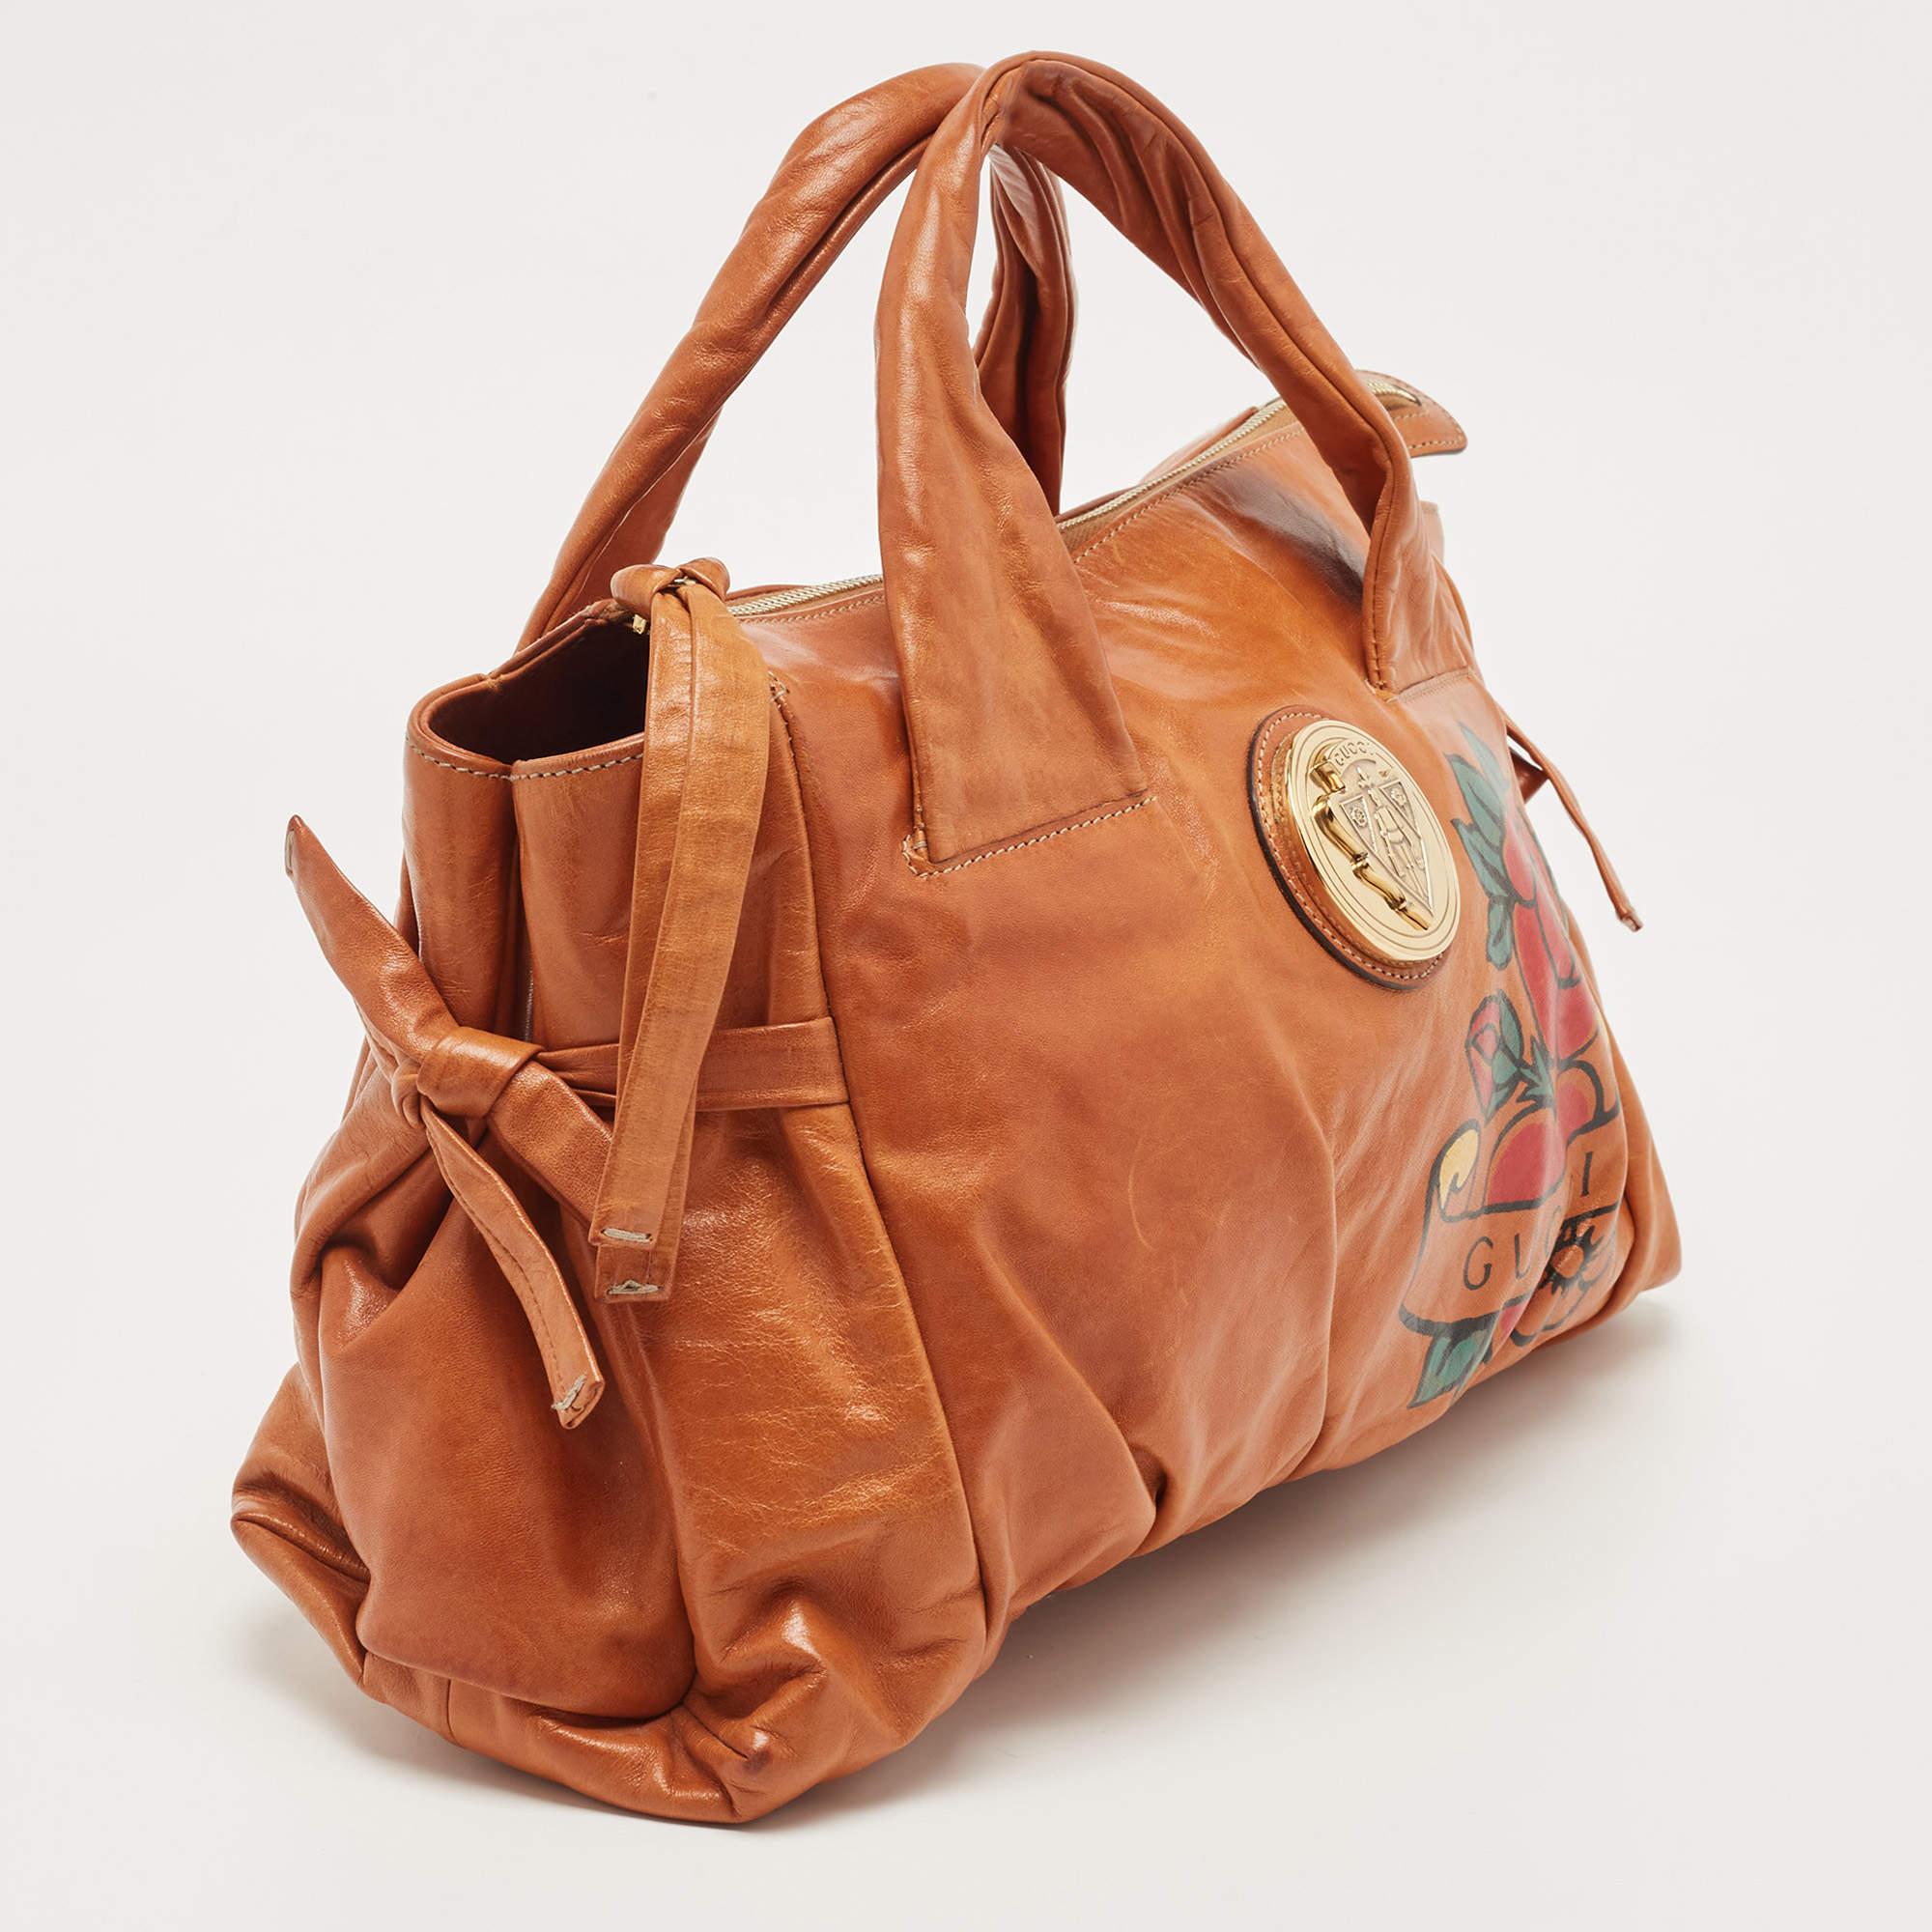 Introduced in 2008, the Gucci Hysteria is loved and admired by style enthusiasts all around the world. The fabric and leather interior of this hobo is spaciously sized to keep your daily belongings safe. Created from tan leather with beautiful